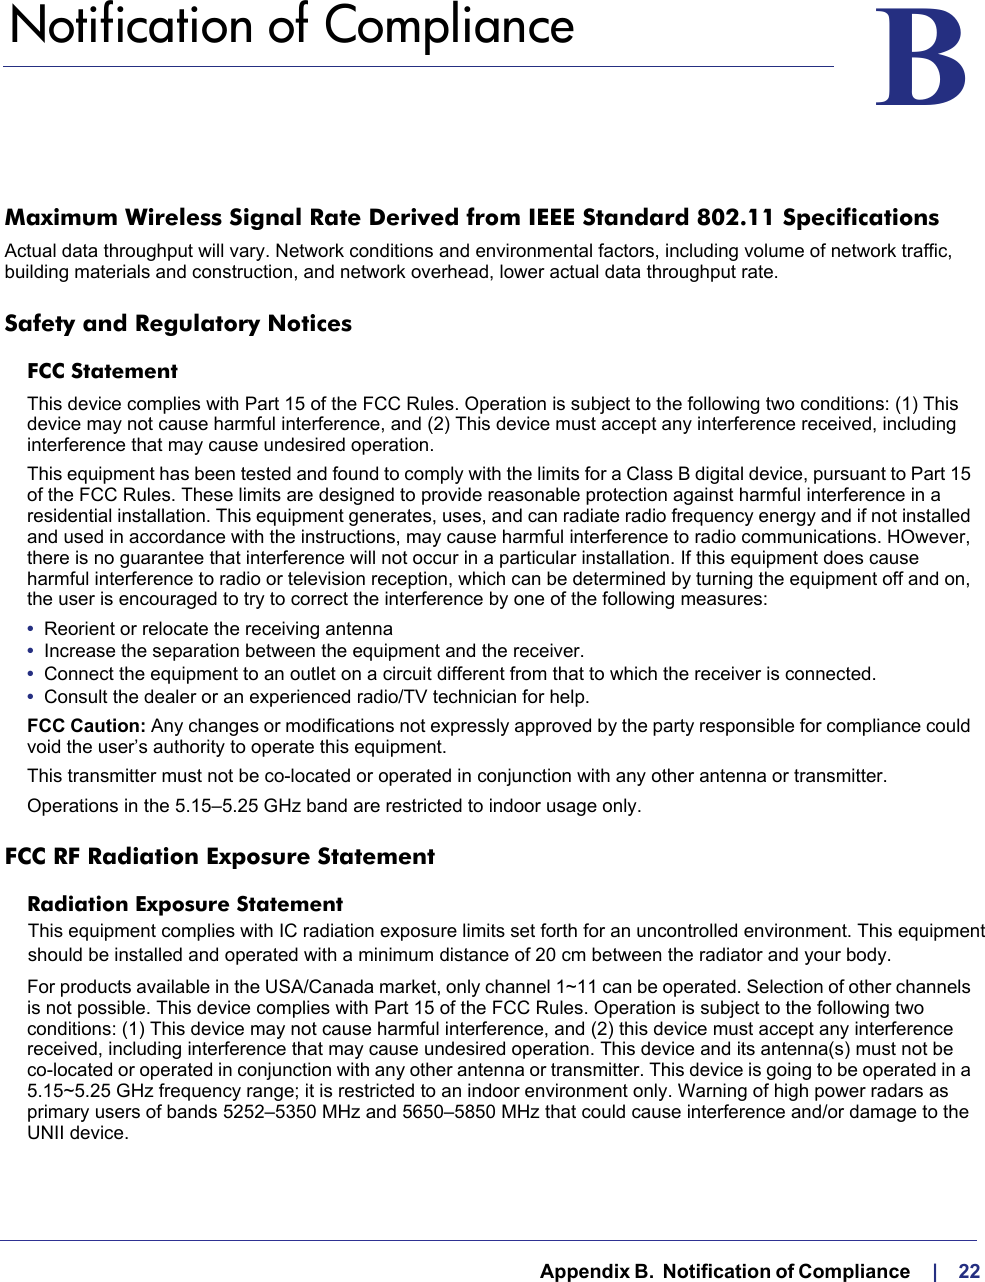   Appendix B.  Notification of Compliance     |    22BB.   Notification of ComplianceMaximum Wireless Signal Rate Derived from IEEE Standard 802.11 SpecificationsActual data throughput will vary. Network conditions and environmental factors, including volume of network traffic, building materials and construction, and network overhead, lower actual data throughput rate.Safety and Regulatory NoticesFCC Statement This device complies with Part 15 of the FCC Rules. Operation is subject to the following two conditions: (1) This device may not cause harmful interference, and (2) This device must accept any interference received, including interference that may cause undesired operation. This equipment has been tested and found to comply with the limits for a Class B digital device, pursuant to Part 15 of the FCC Rules. These limits are designed to provide reasonable protection against harmful interference in a residential installation. This equipment generates, uses, and can radiate radio frequency energy and if not installed and used in accordance with the instructions, may cause harmful interference to radio communications. HOwever, there is no guarantee that interference will not occur in a particular installation. If this equipment does cause harmful interference to radio or television reception, which can be determined by turning the equipment off and on, the user is encouraged to try to correct the interference by one of the following measures:•  Reorient or relocate the receiving antenna •  Increase the separation between the equipment and the receiver.•  Connect the equipment to an outlet on a circuit different from that to which the receiver is connected.•  Consult the dealer or an experienced radio/TV technician for help.FCC Caution: Any changes or modifications not expressly approved by the party responsible for compliance could void the user’s authority to operate this equipment.This transmitter must not be co-located or operated in conjunction with any other antenna or transmitter.Operations in the 5.15–5.25 GHz band are restricted to indoor usage only.FCC RF Radiation Exposure StatementRadiation Exposure Statement For products available in the USA/Canada market, only channel 1~11 can be operated. Selection of other channels is not possible. This device complies with Part 15 of the FCC Rules. Operation is subject to the following two conditions: (1) This device may not cause harmful interference, and (2) this device must accept any interference received, including interference that may cause undesired operation. This device and its antenna(s) must not be co-located or operated in conjunction with any other antenna or transmitter. This device is going to be operated in a 5.15~5.25 GHz frequency range; it is restricted to an indoor environment only. Warning of high power radars as primary users of bands 5252–5350 MHz and 5650–5850 MHz that could cause interference and/or damage to the UNII device.This equipment complies with IC radiation exposure limits set forth for an uncontrolled environment. This equipment should be installed and operated with a minimum distance of 20 cm between the radiator and your body.